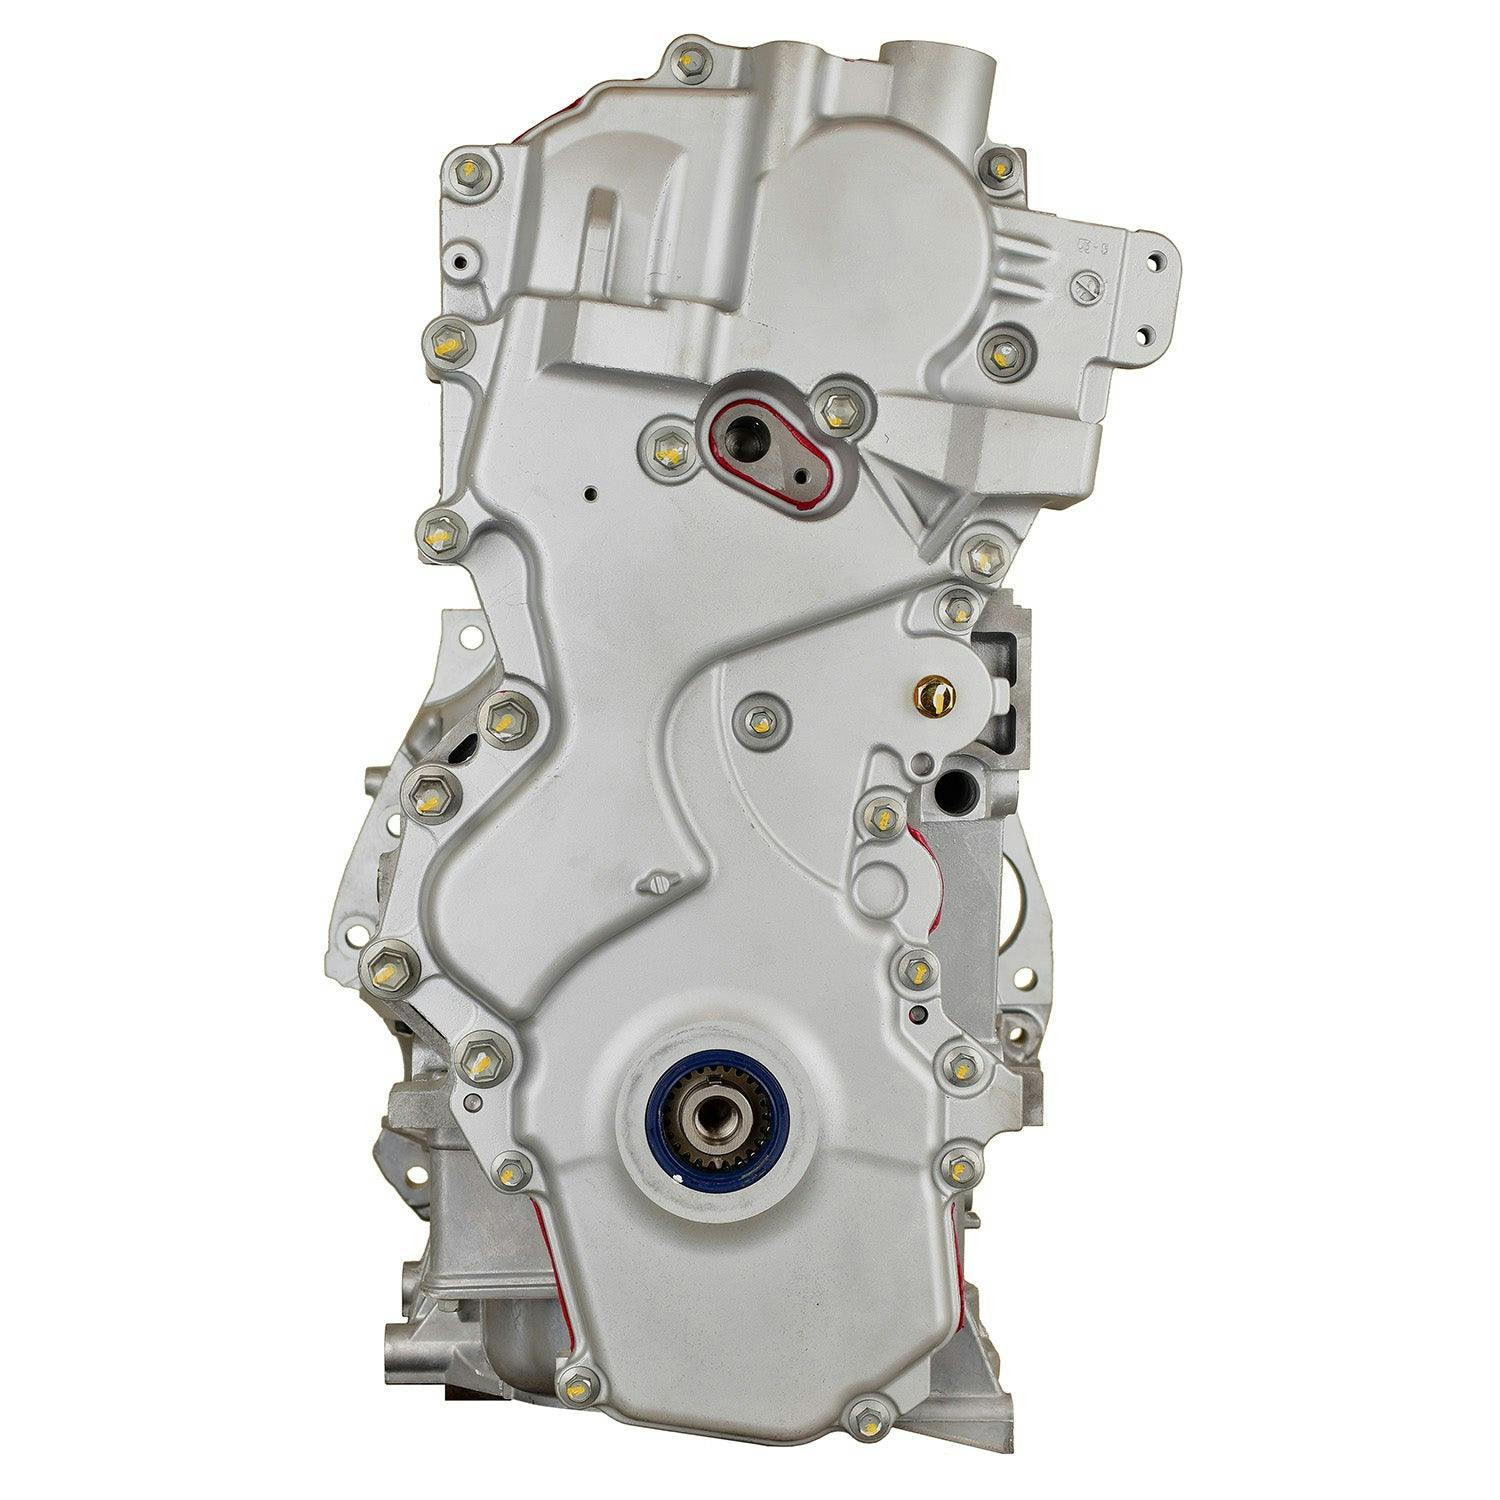 1.8L Inline-4 Engine for 2009-2010 Nissan Cube